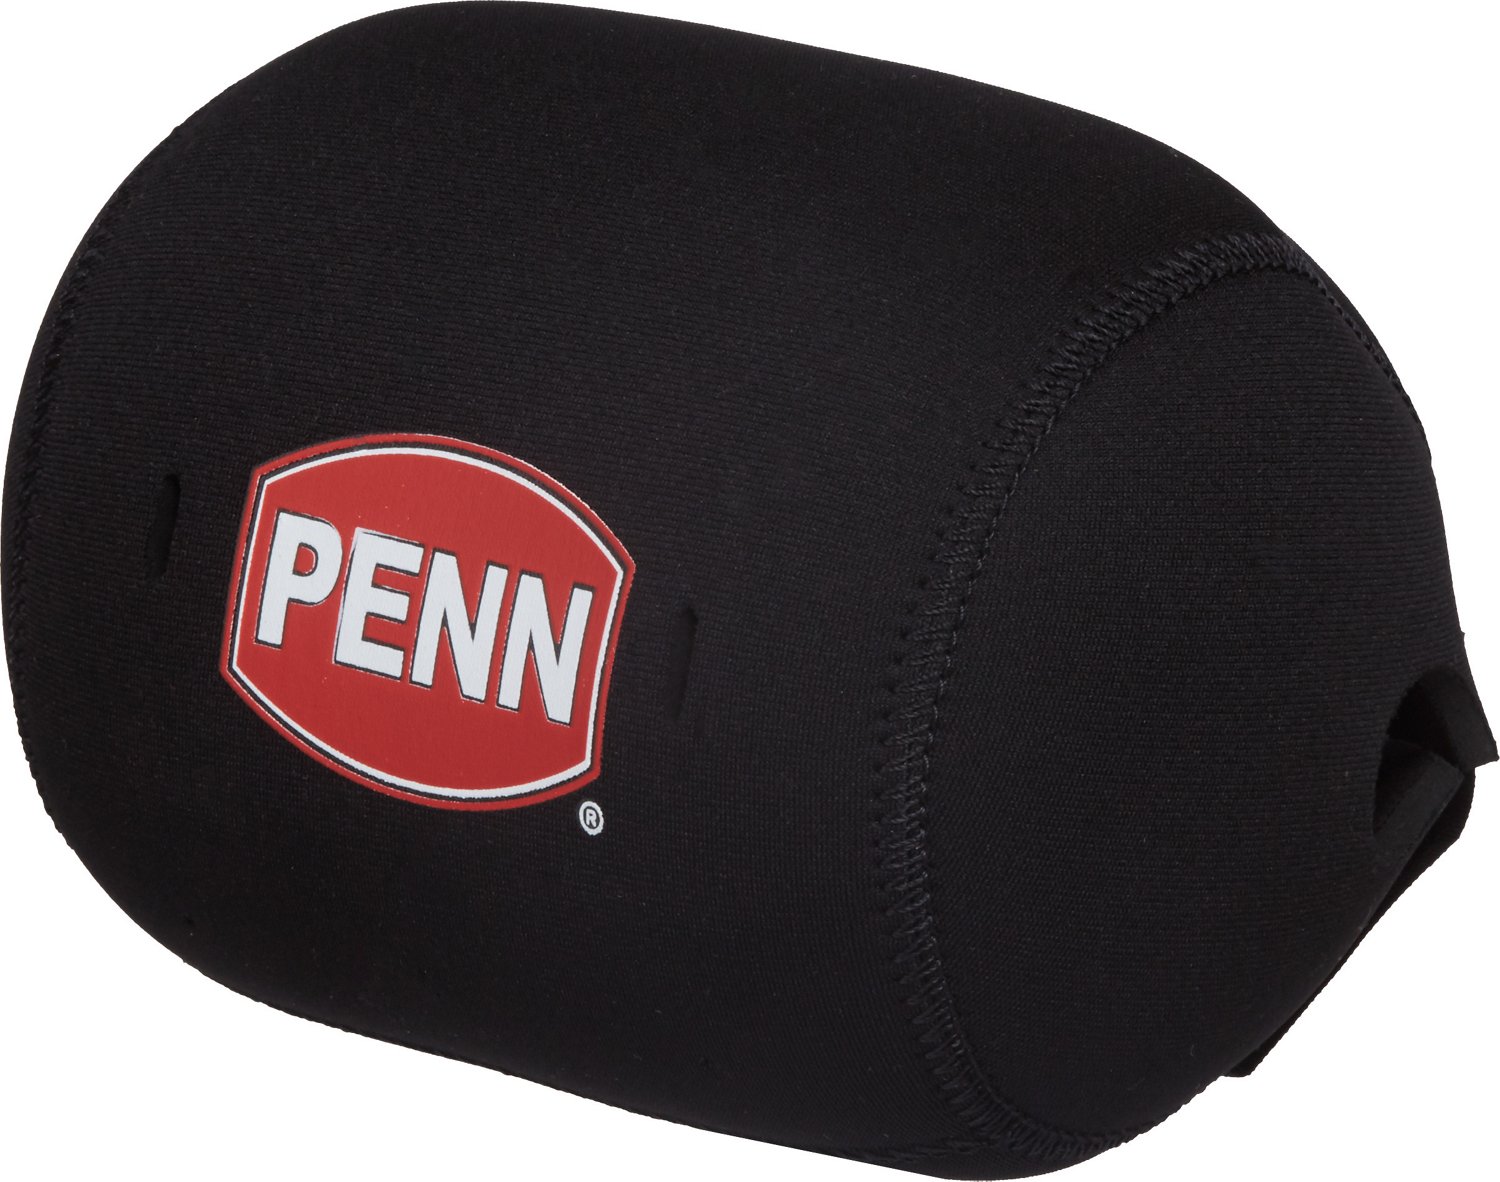 PENN® Conventional Reel Cover